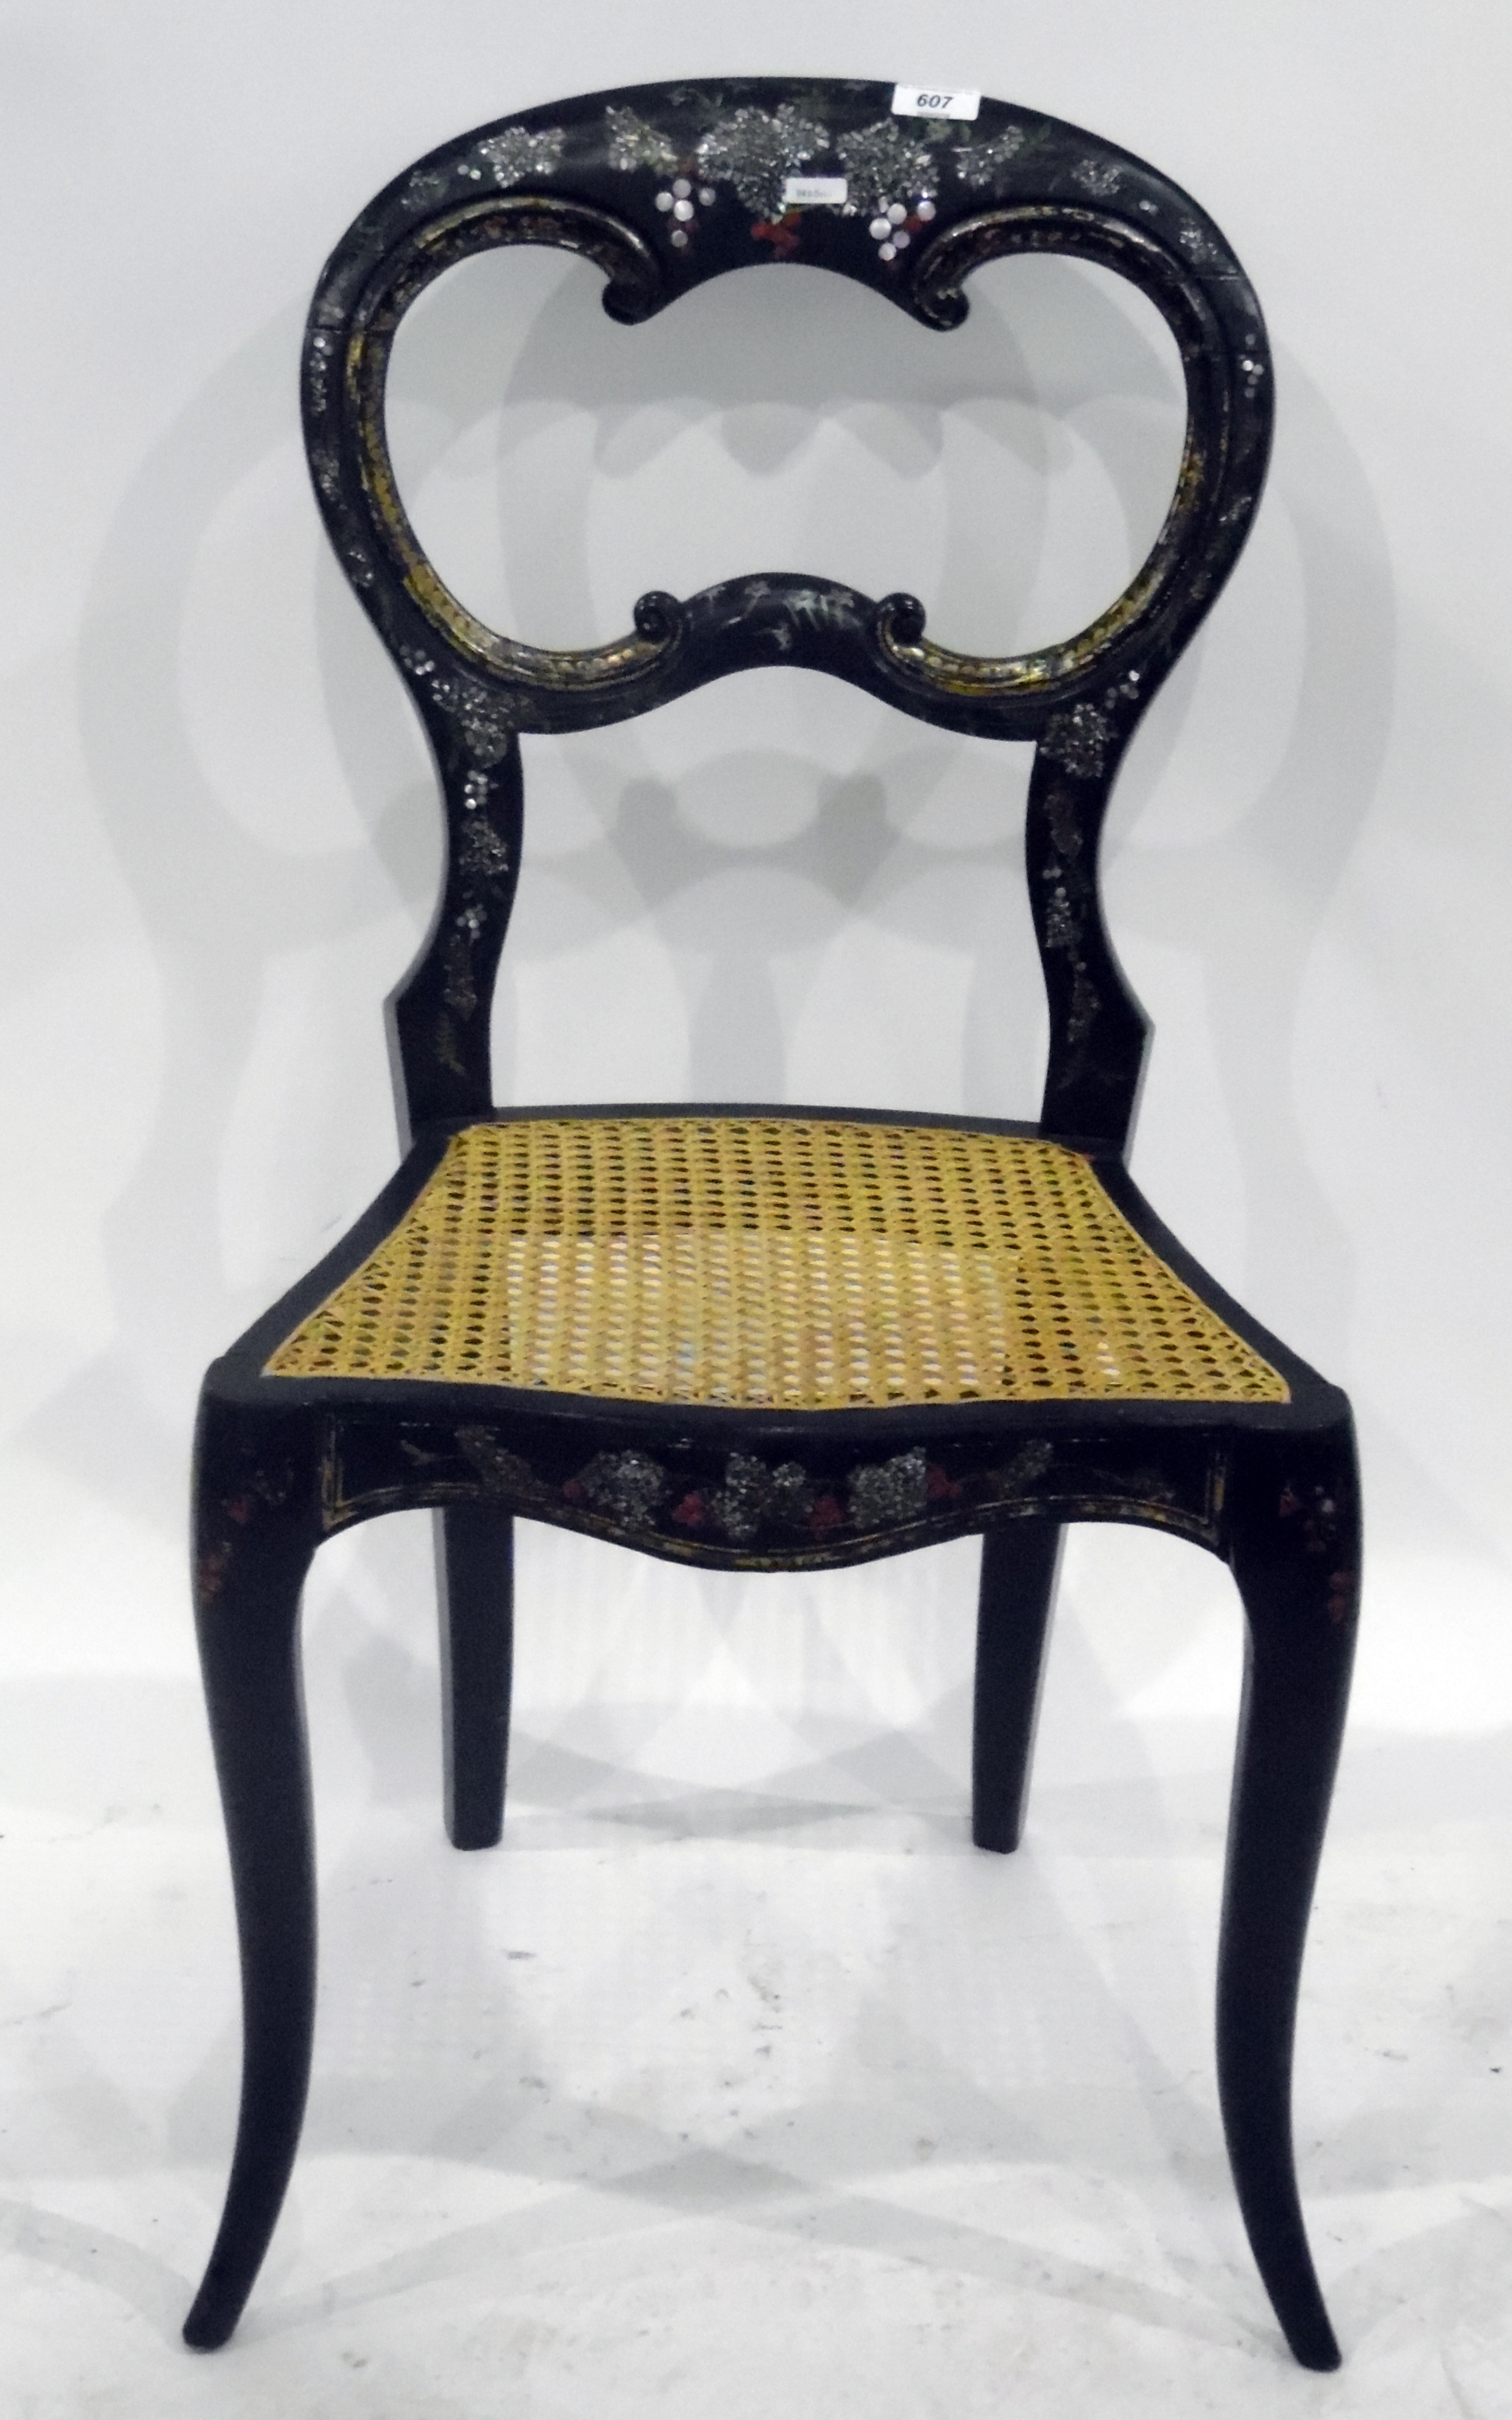 Victorian gilded and mother-of-pearl inlaid papier mache chair with cane seat and vine decoration - Image 2 of 2